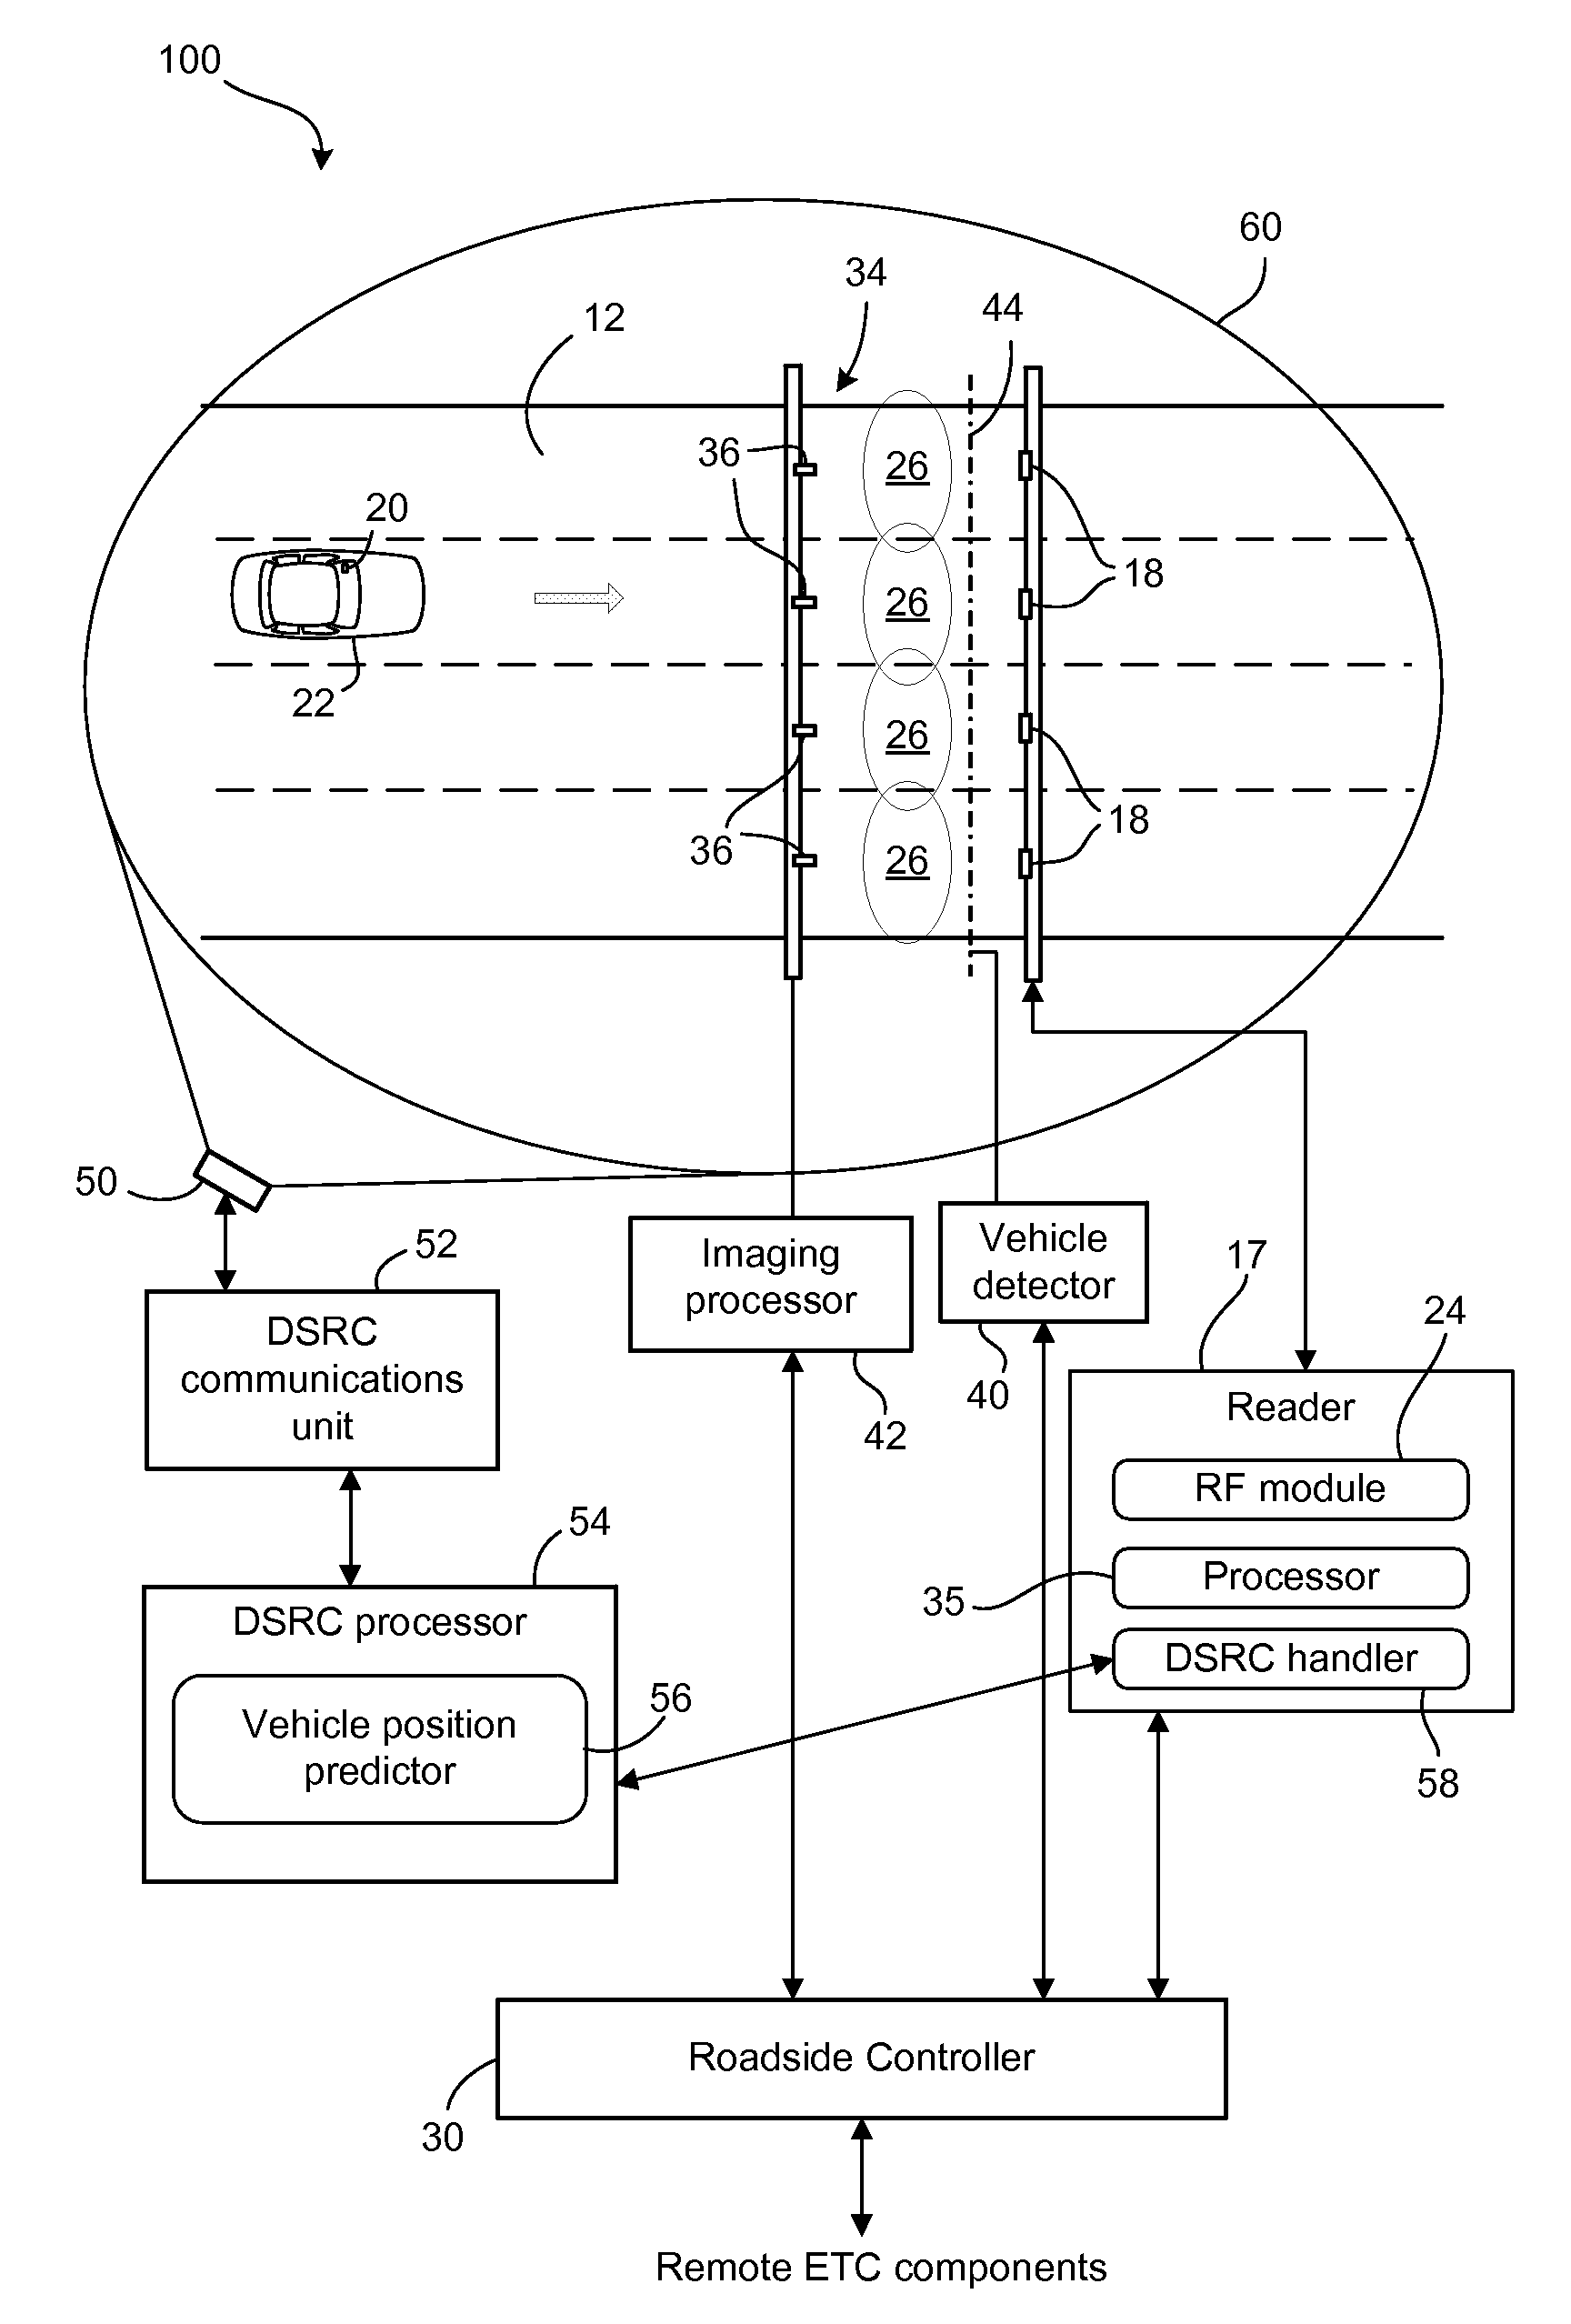 Real-time vehicle position determination using communications with variable latency